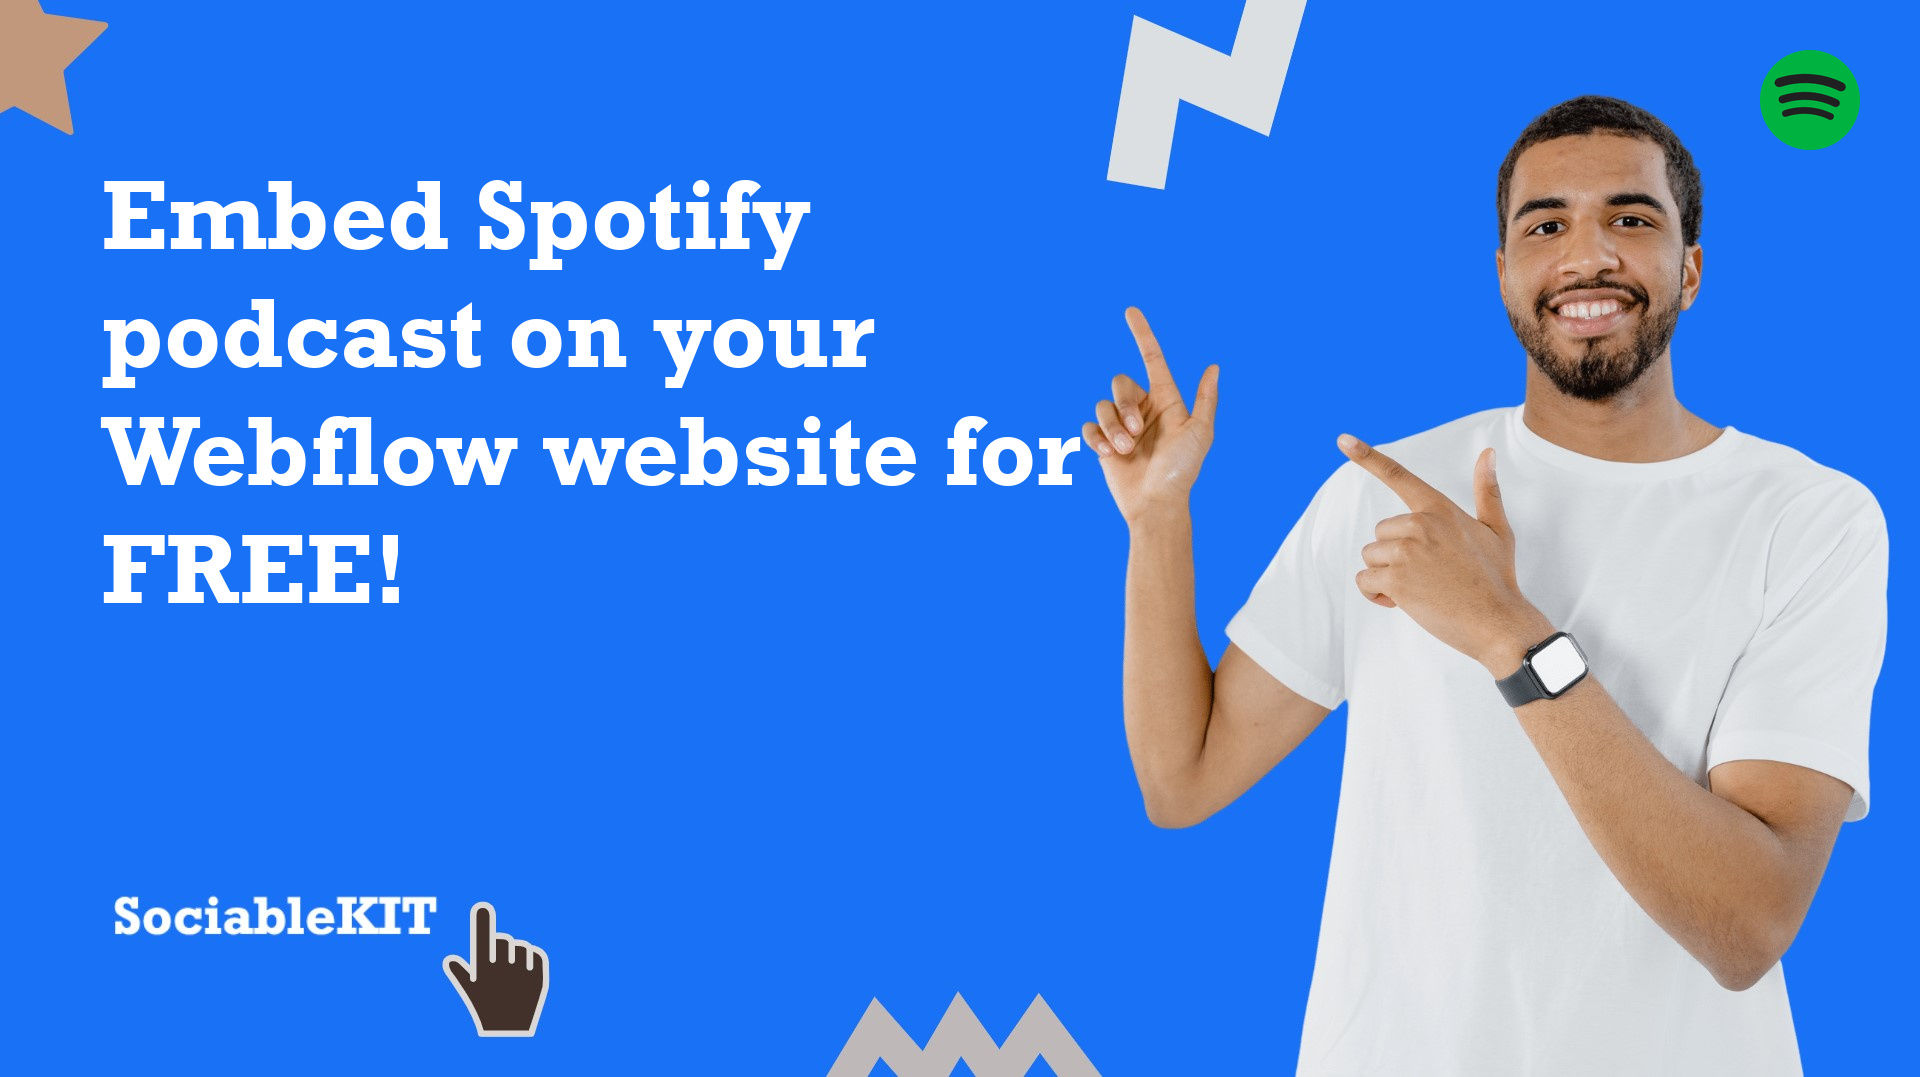 How to embed Spotify podcast on your Webflow website for FREE?